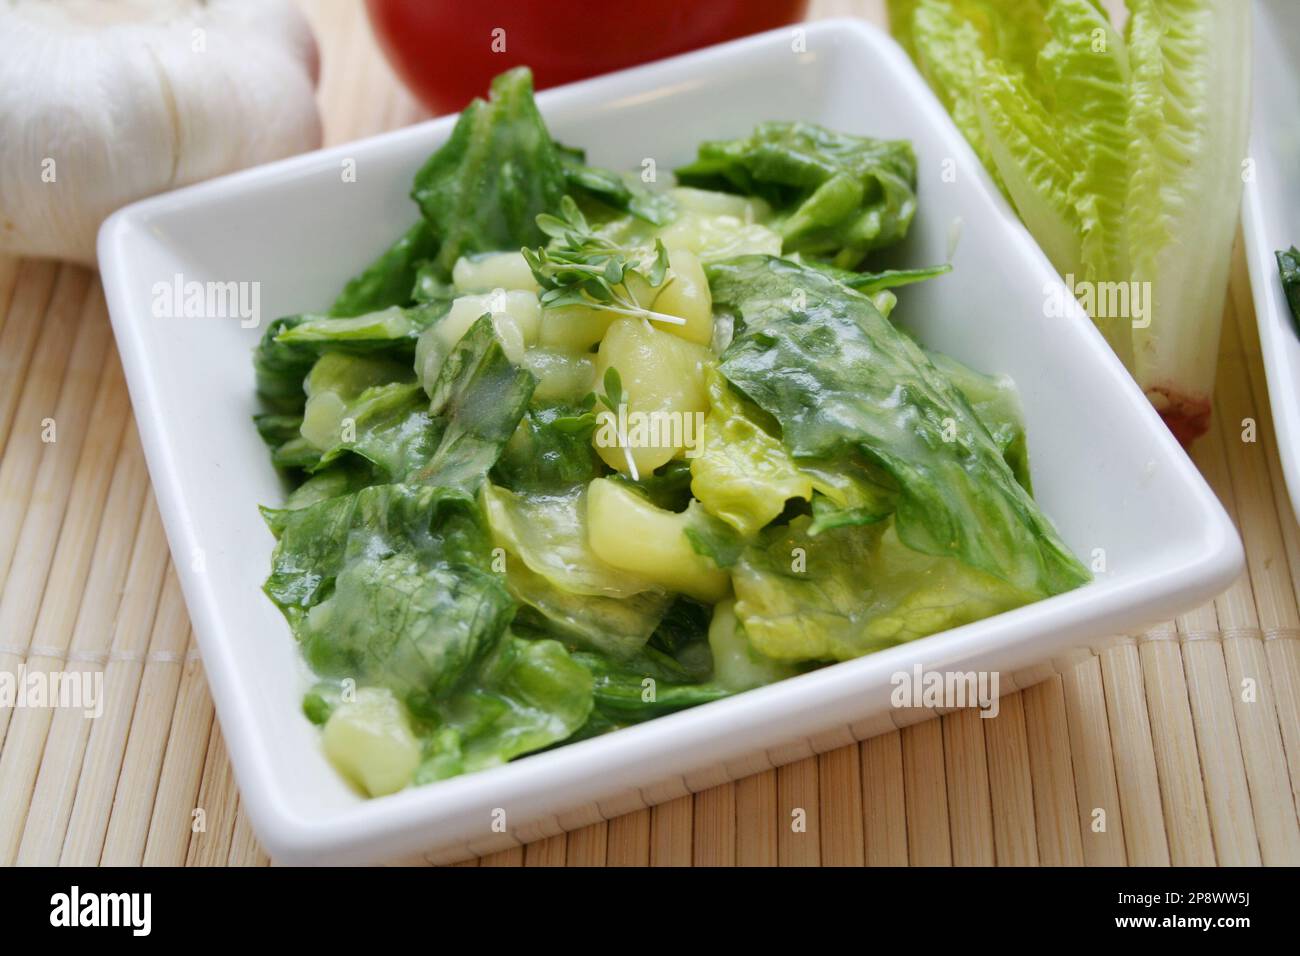 Green Salad With Potatoes Stock Photo